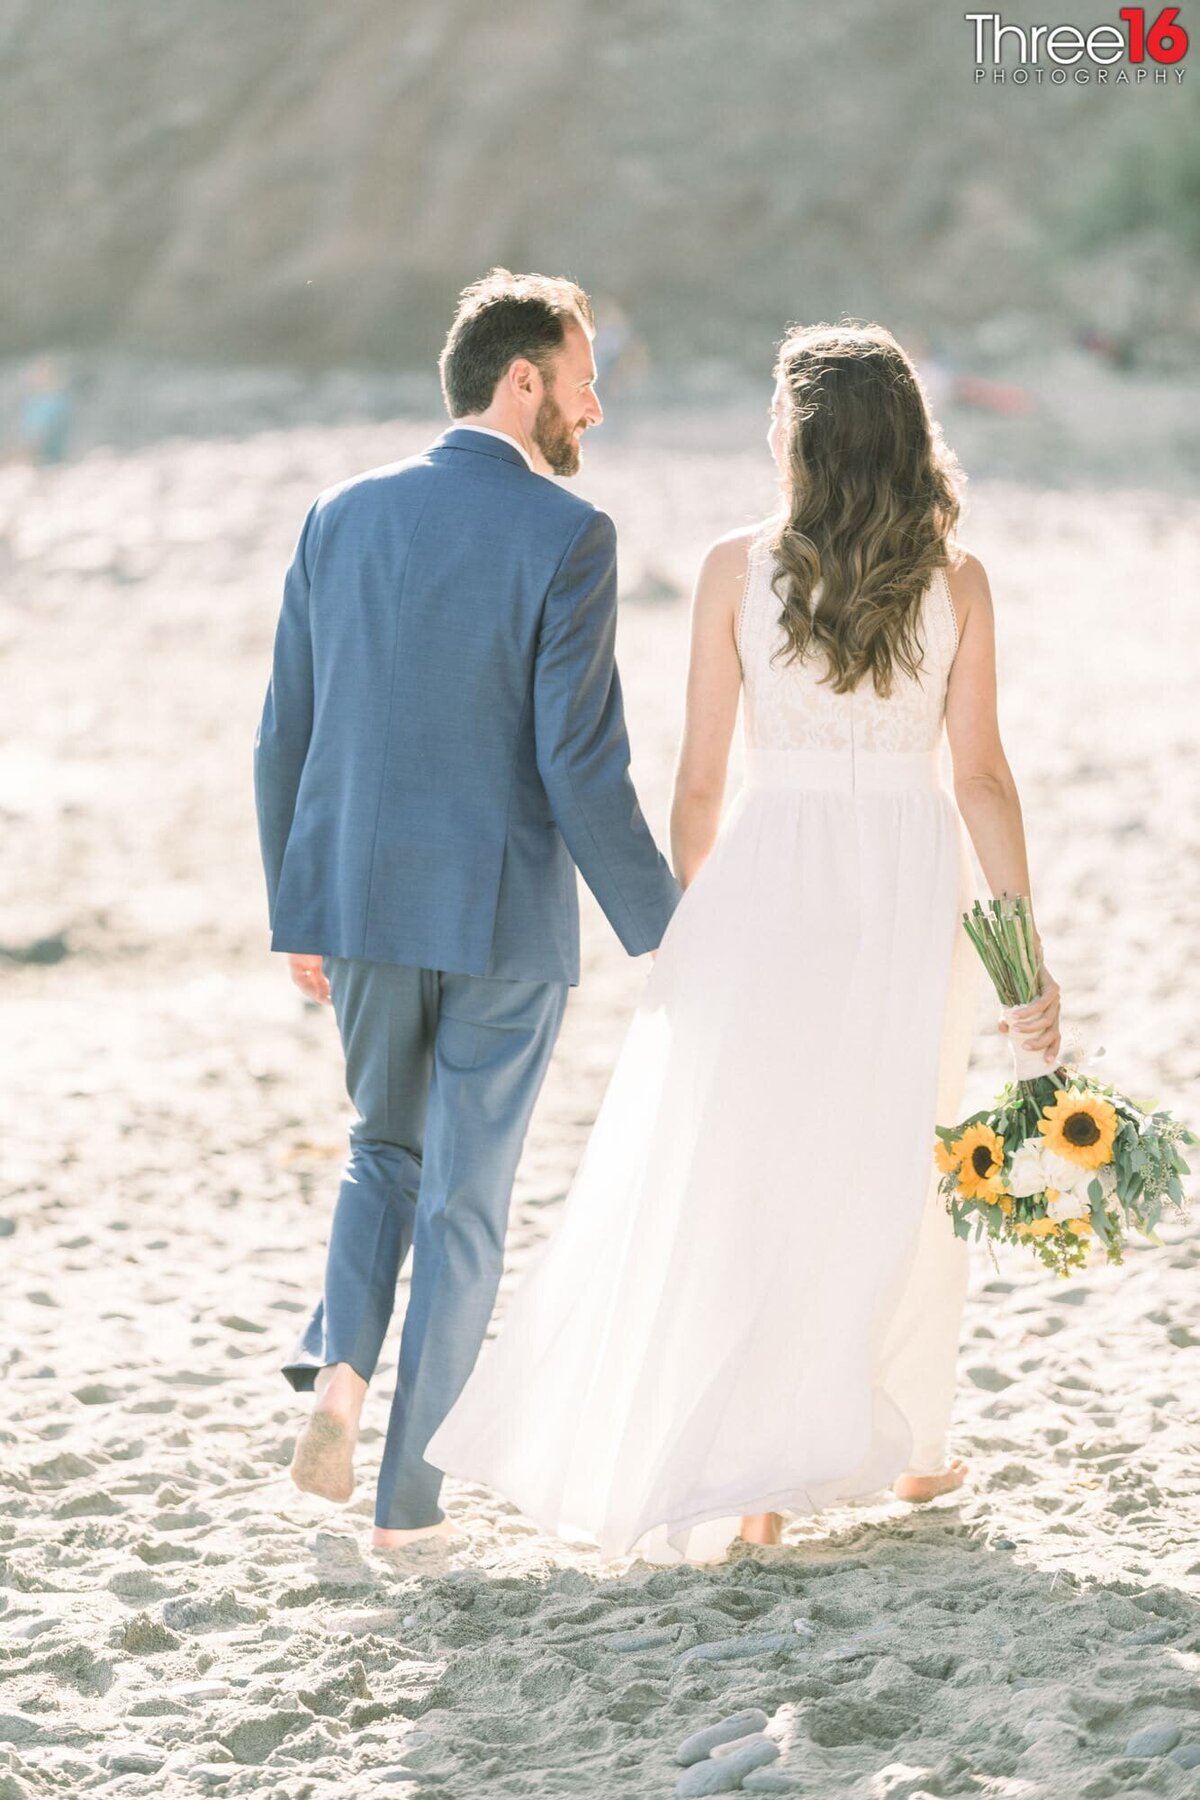 Bride and Groom go for a walk on the beach while holding hands